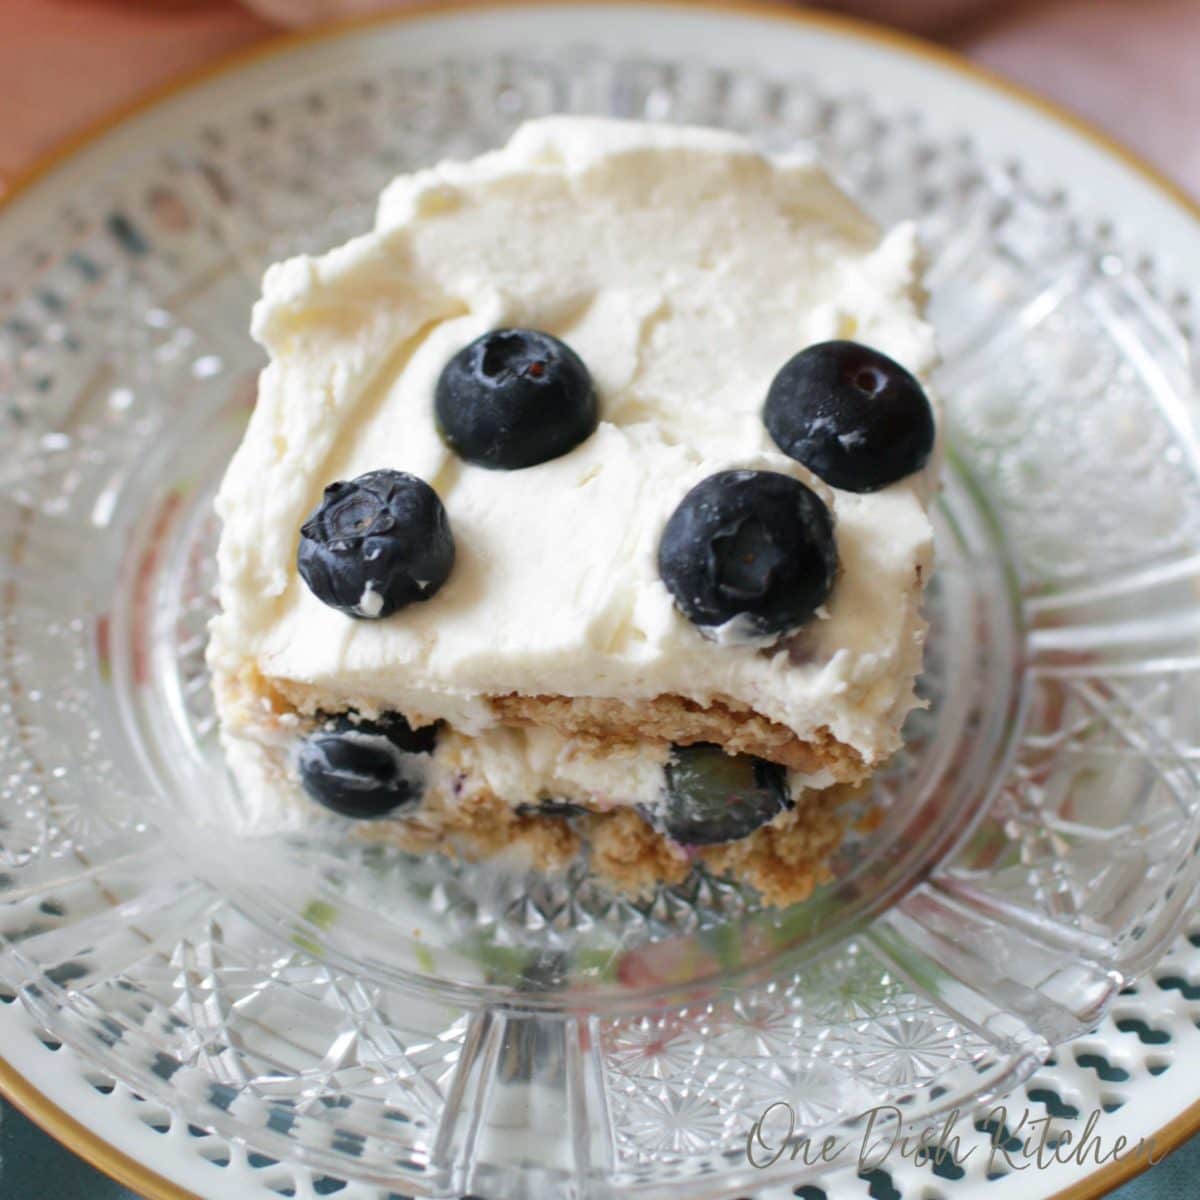 An overhead view of a slice of icebox cake topped with blueberries on a plate